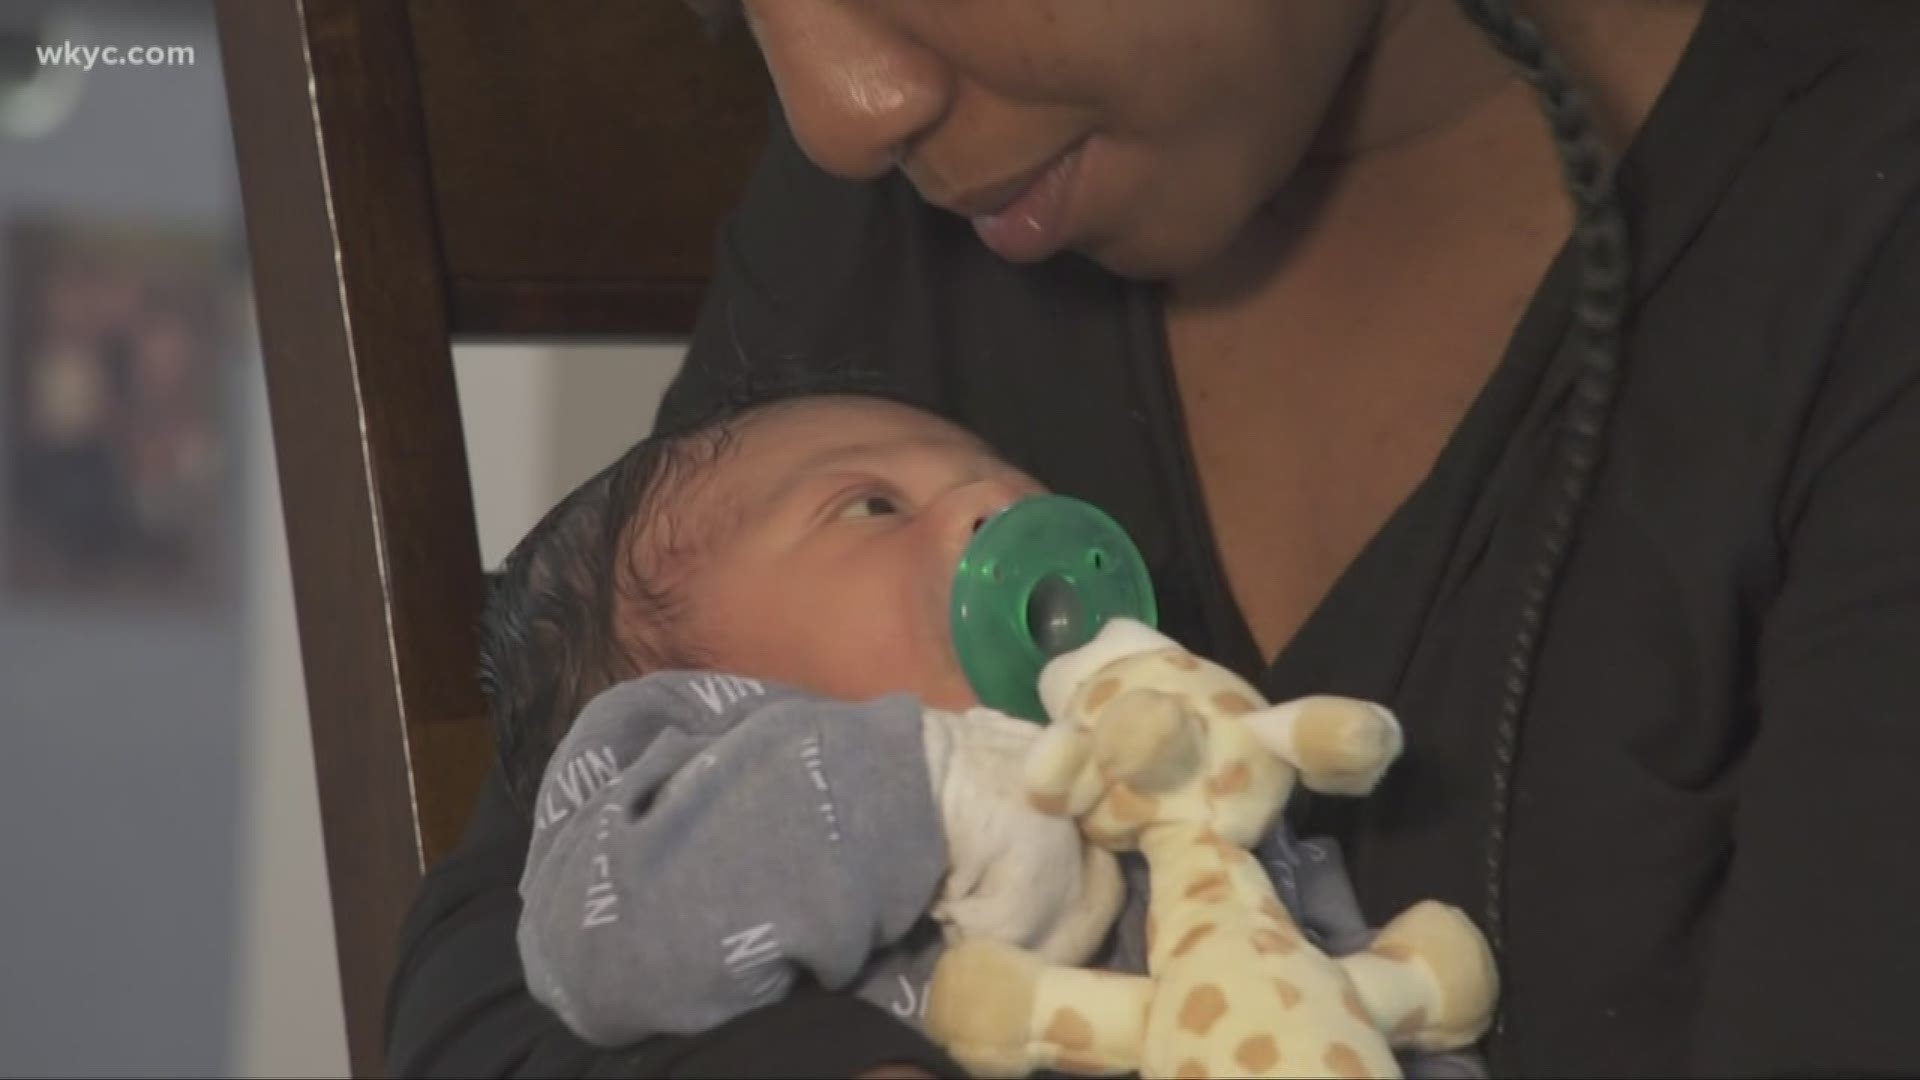 Midwives, doulas and birthing centers report uptick in business since virus outbreak. Monica Robins reports.